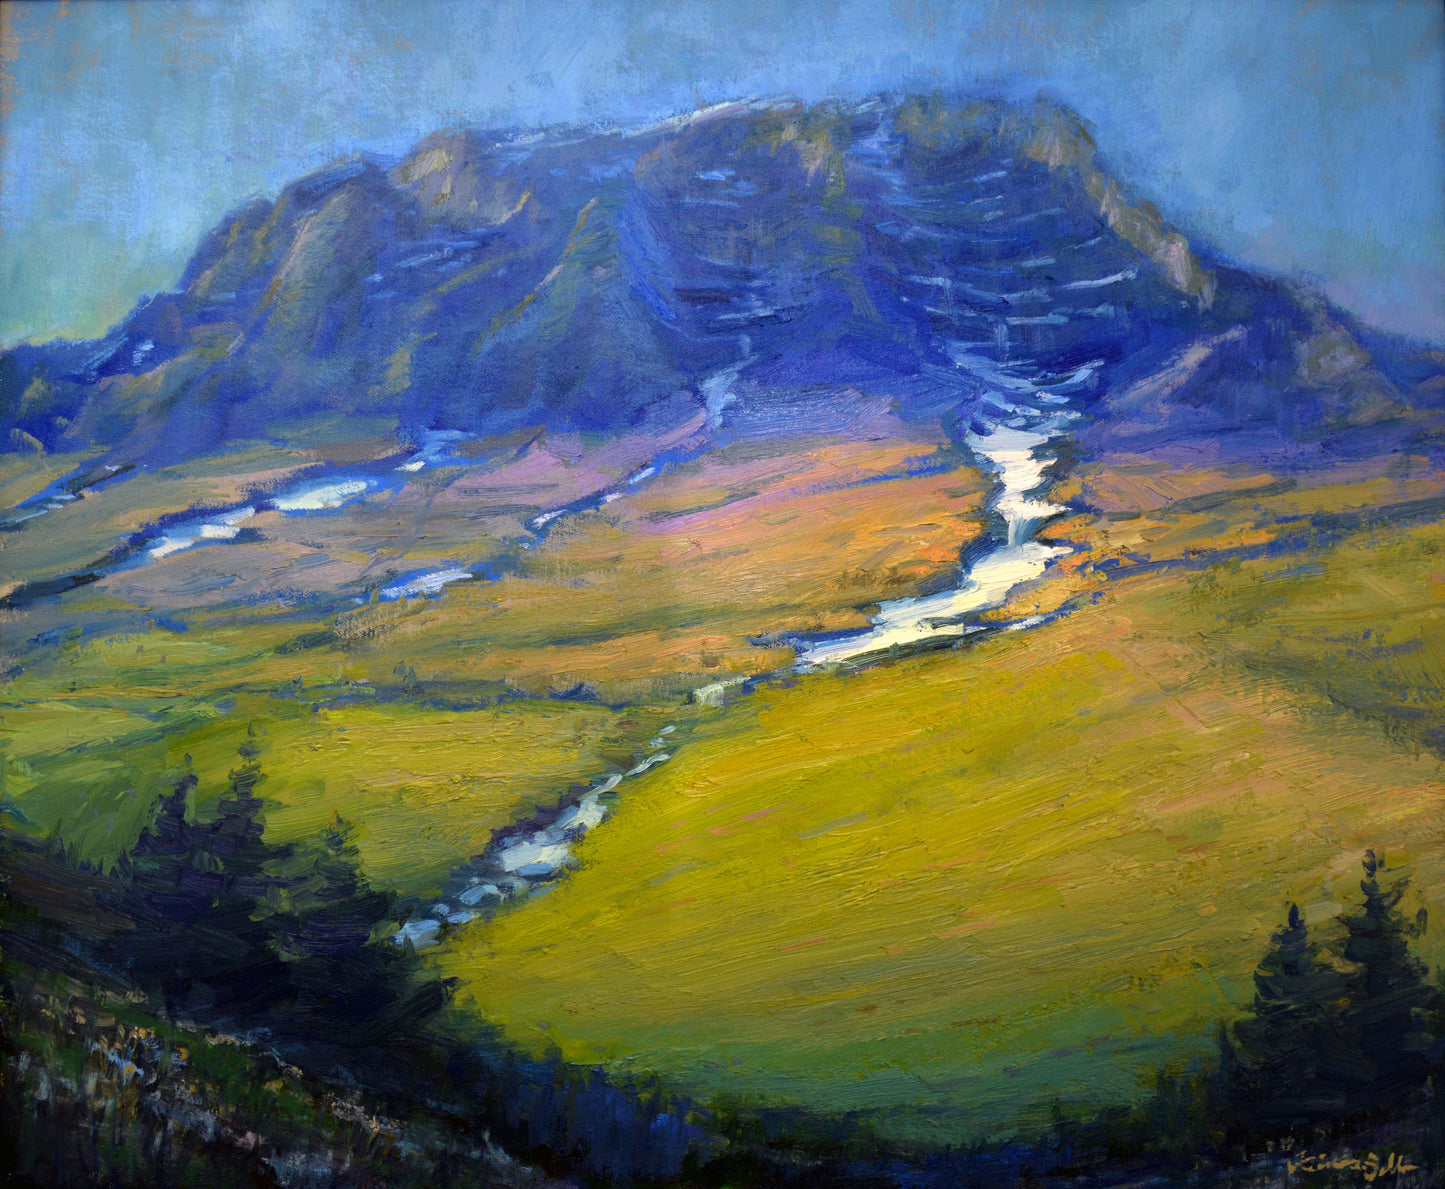 "Wild Country" 20x24 original oil paintng by Artist Kristina Sellers